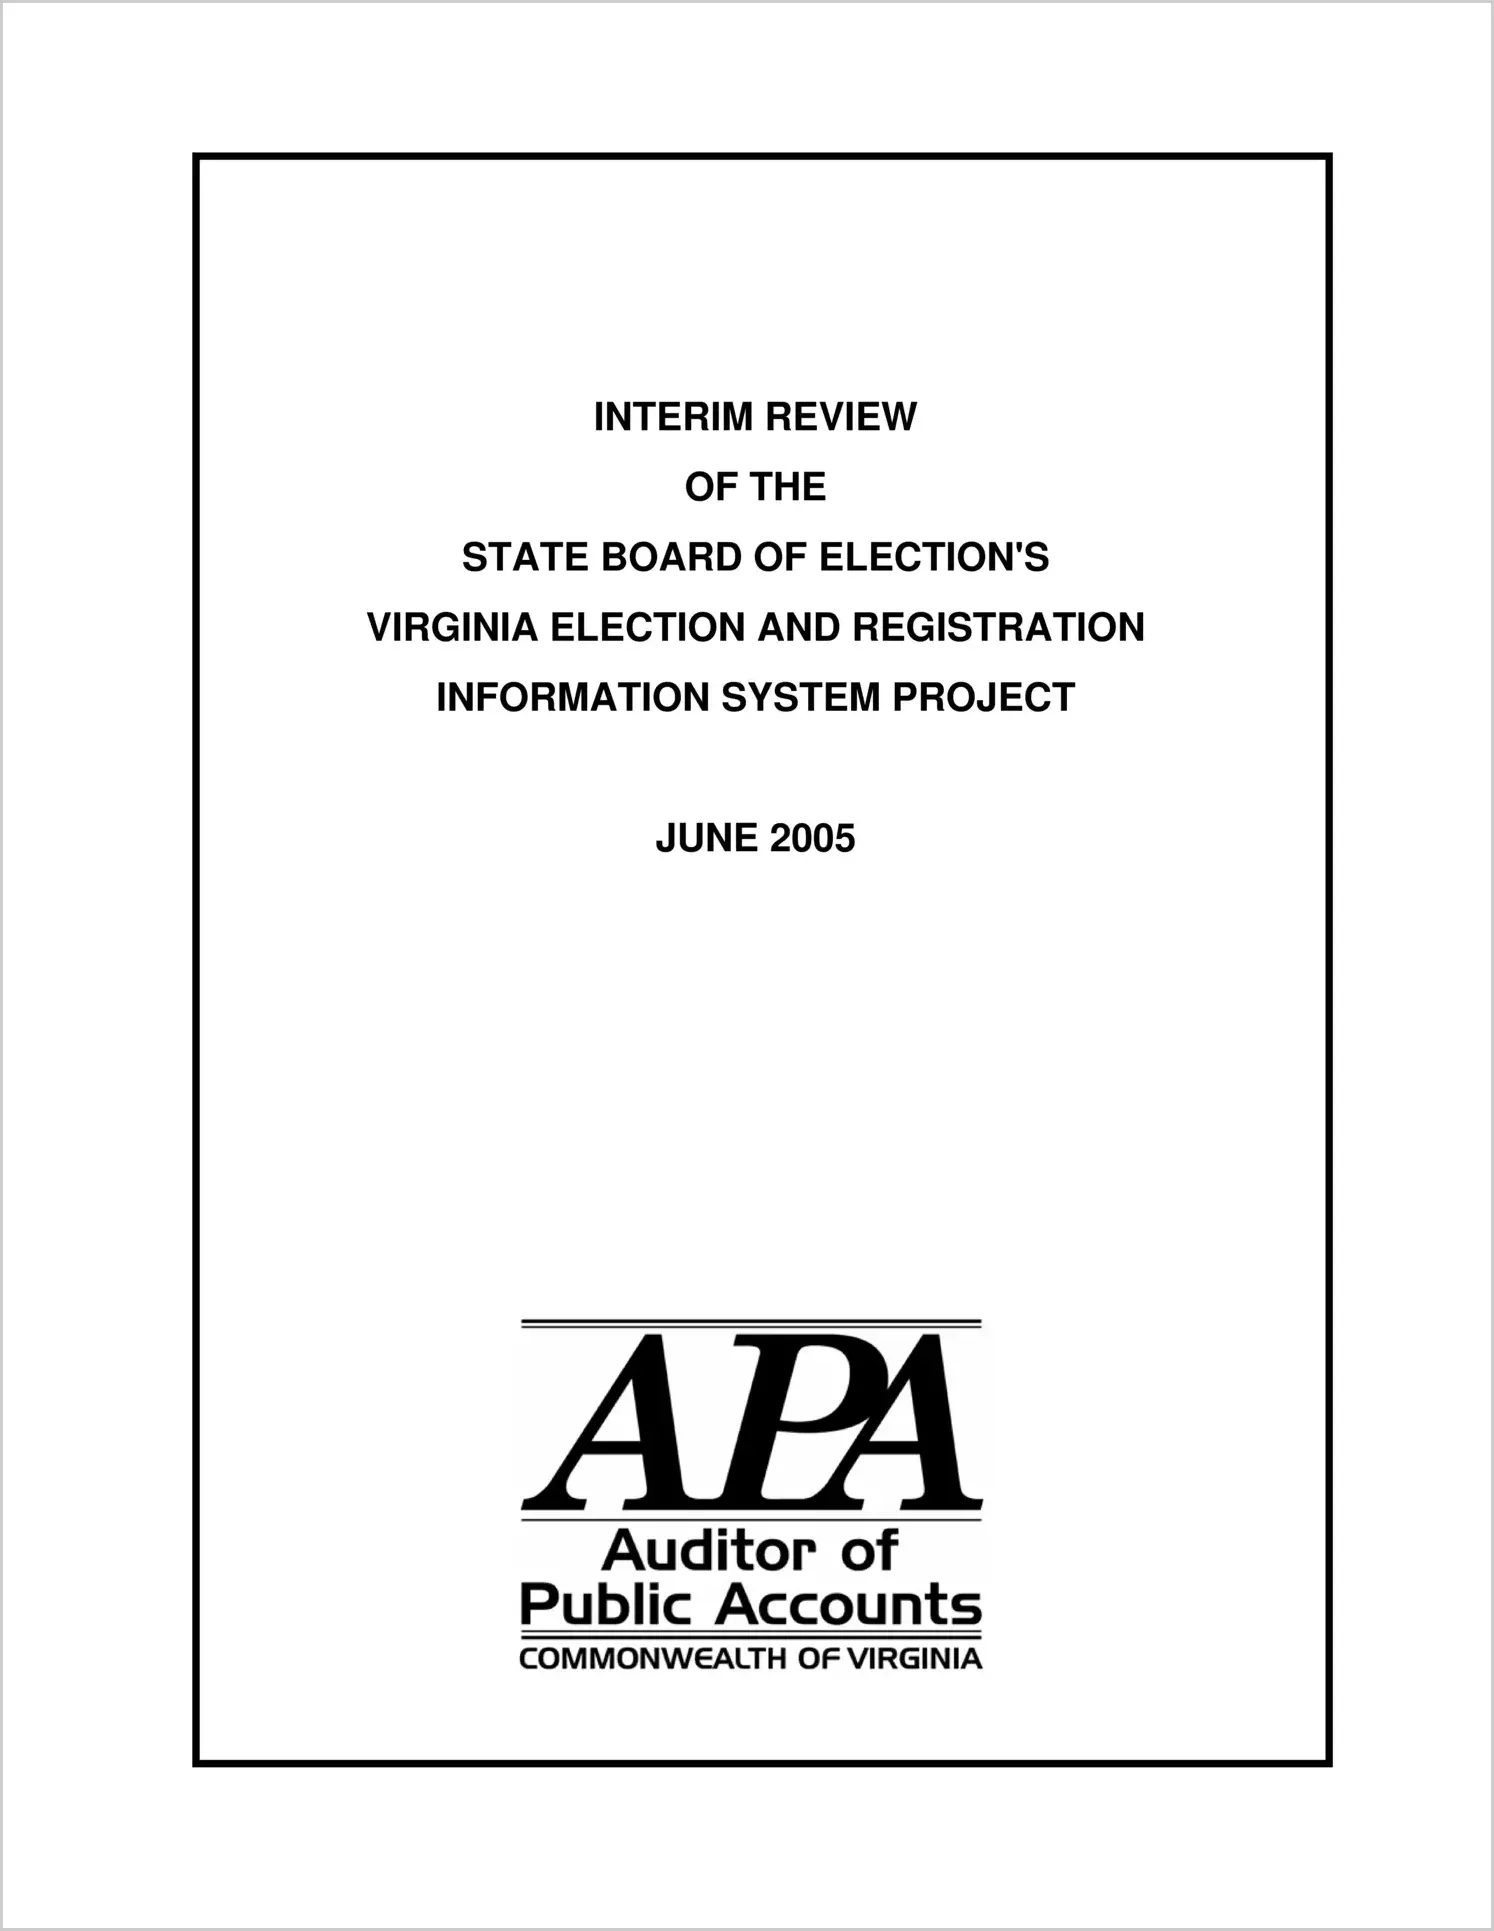 Interim Review of the State Board of Elections Virginia Election and Registration Information System Project (Report Date: June 2005)